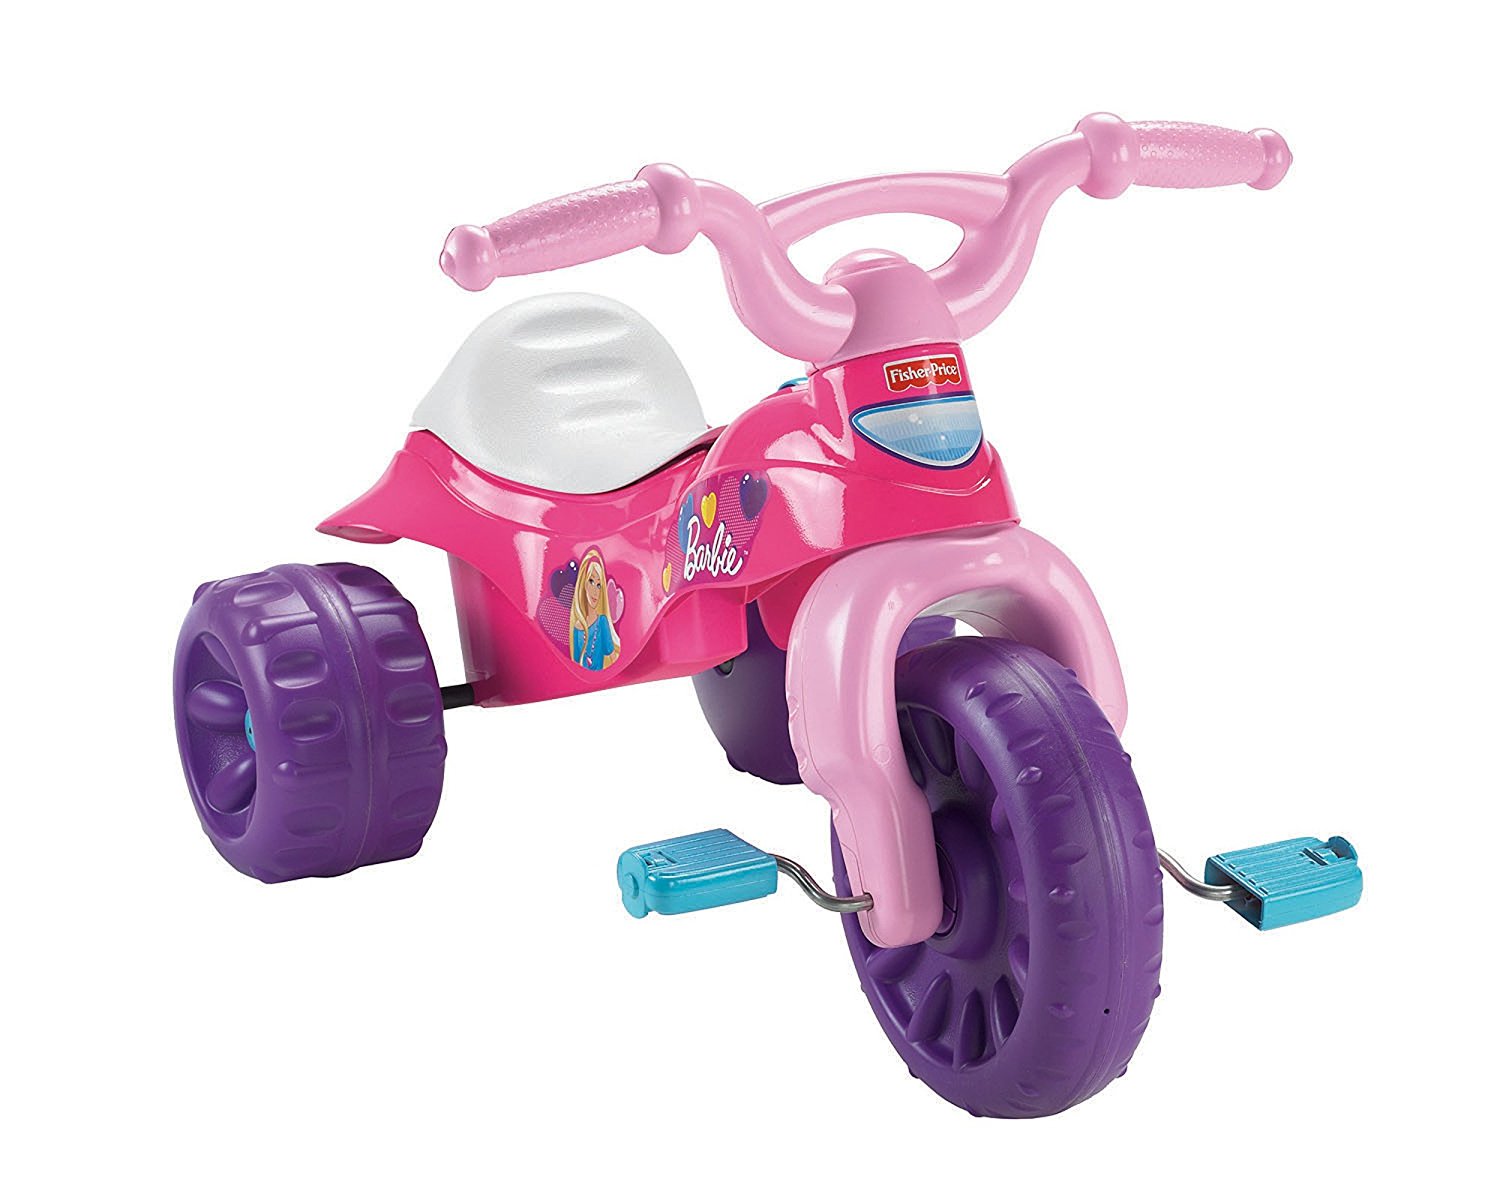 What Are The Best Toys For 2 Year Old Girls? 12 Choices She'll Adore